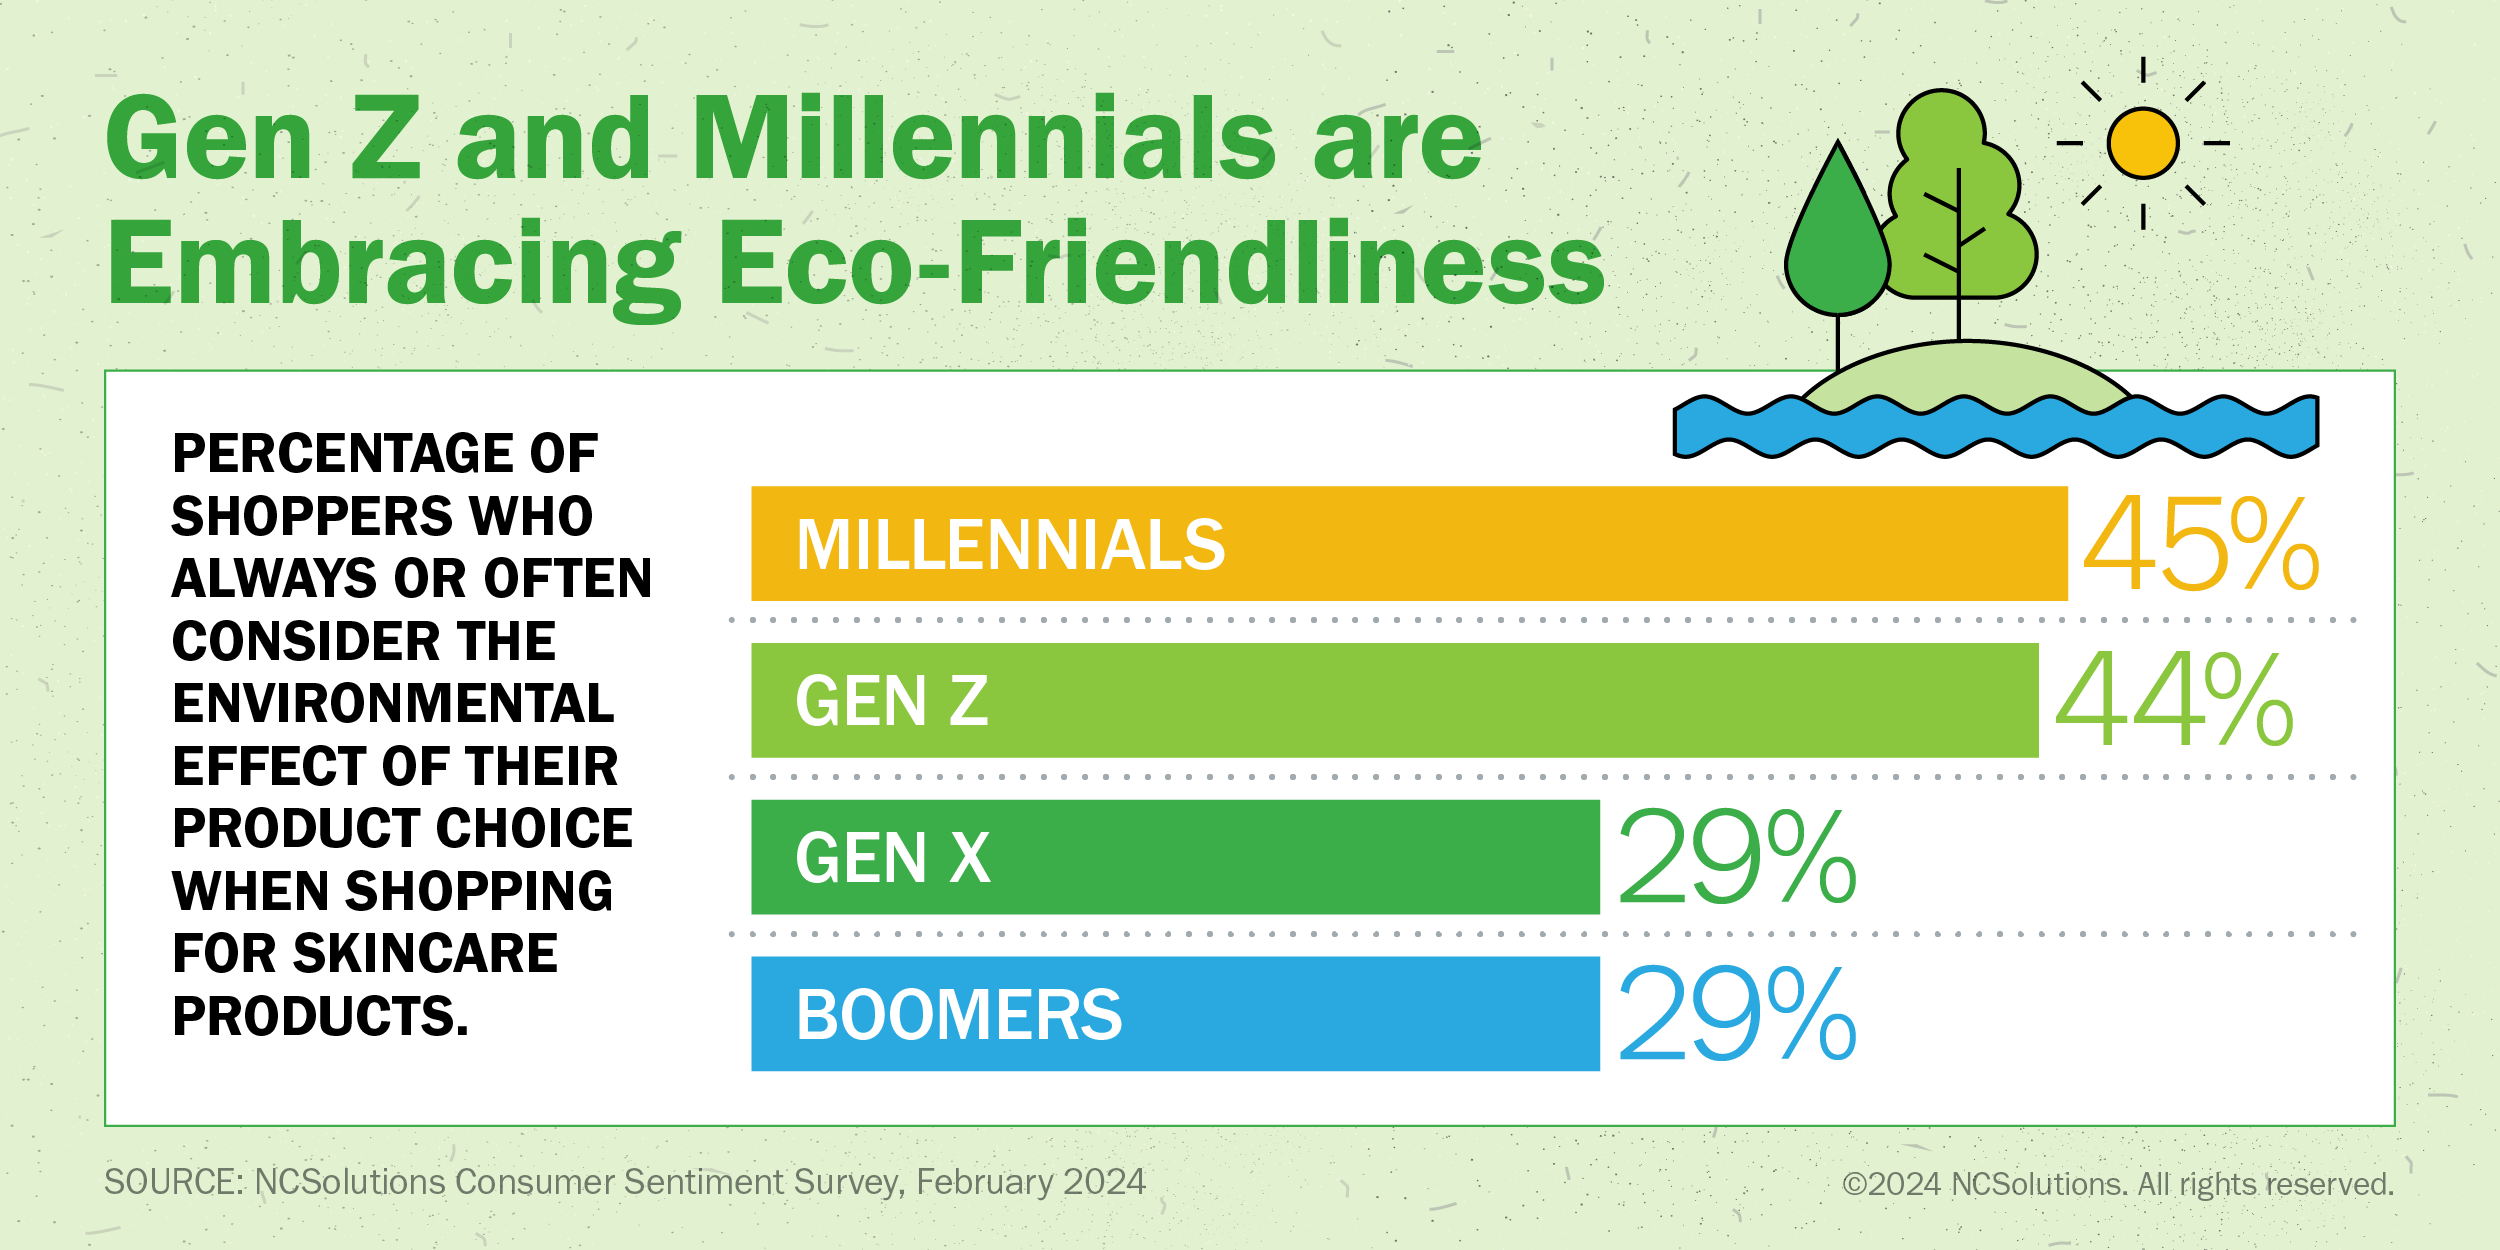 Gen Z and Millennials are embracing eco-friendliness in their products.